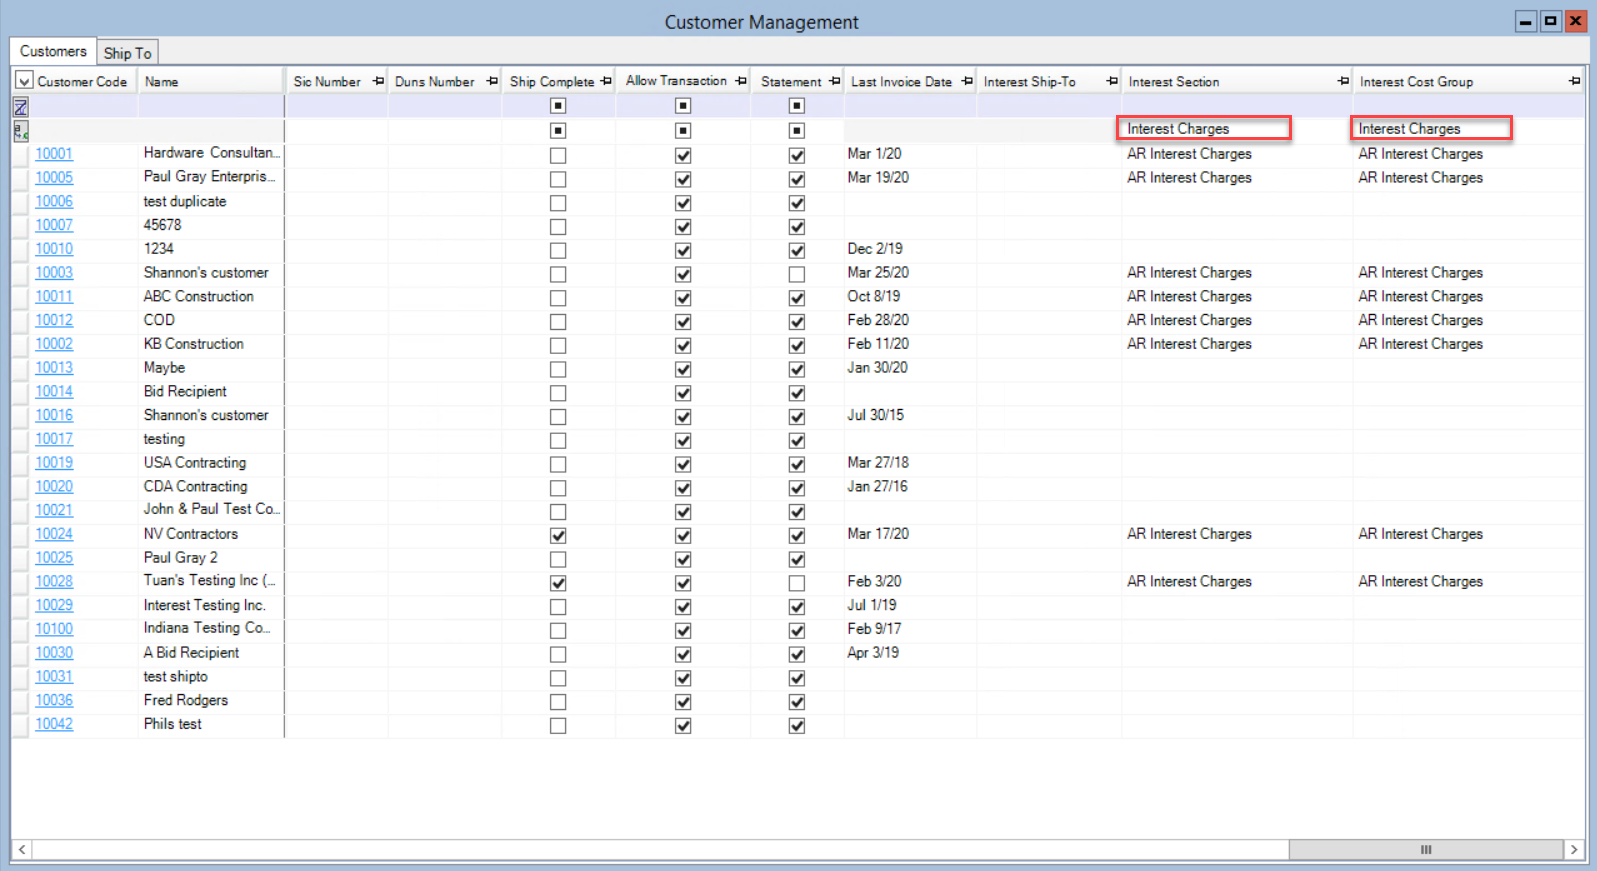 Customer Management window; shows the interest sections and interest cost groups in the Replace line item.